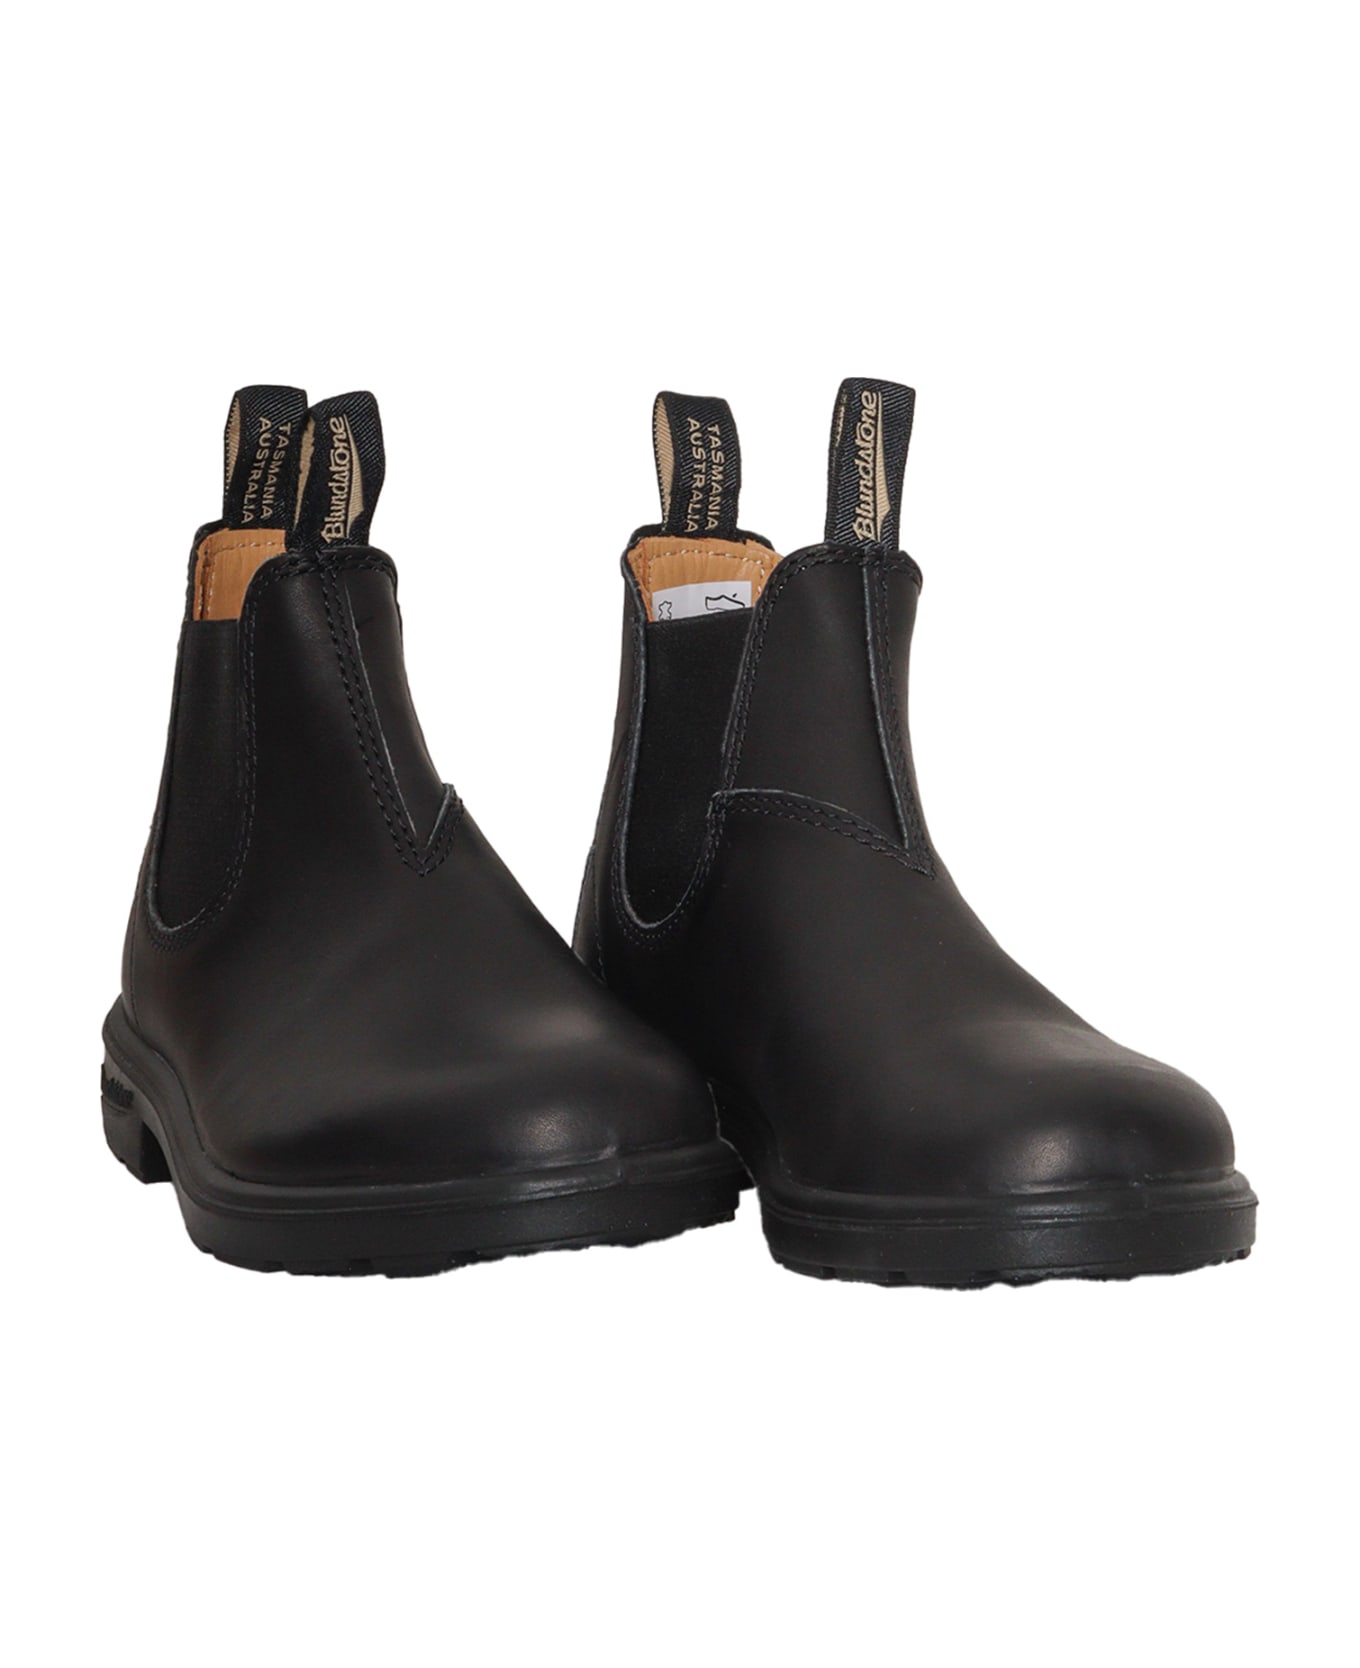 Blundstone Ankle Boots 581 - BLACK